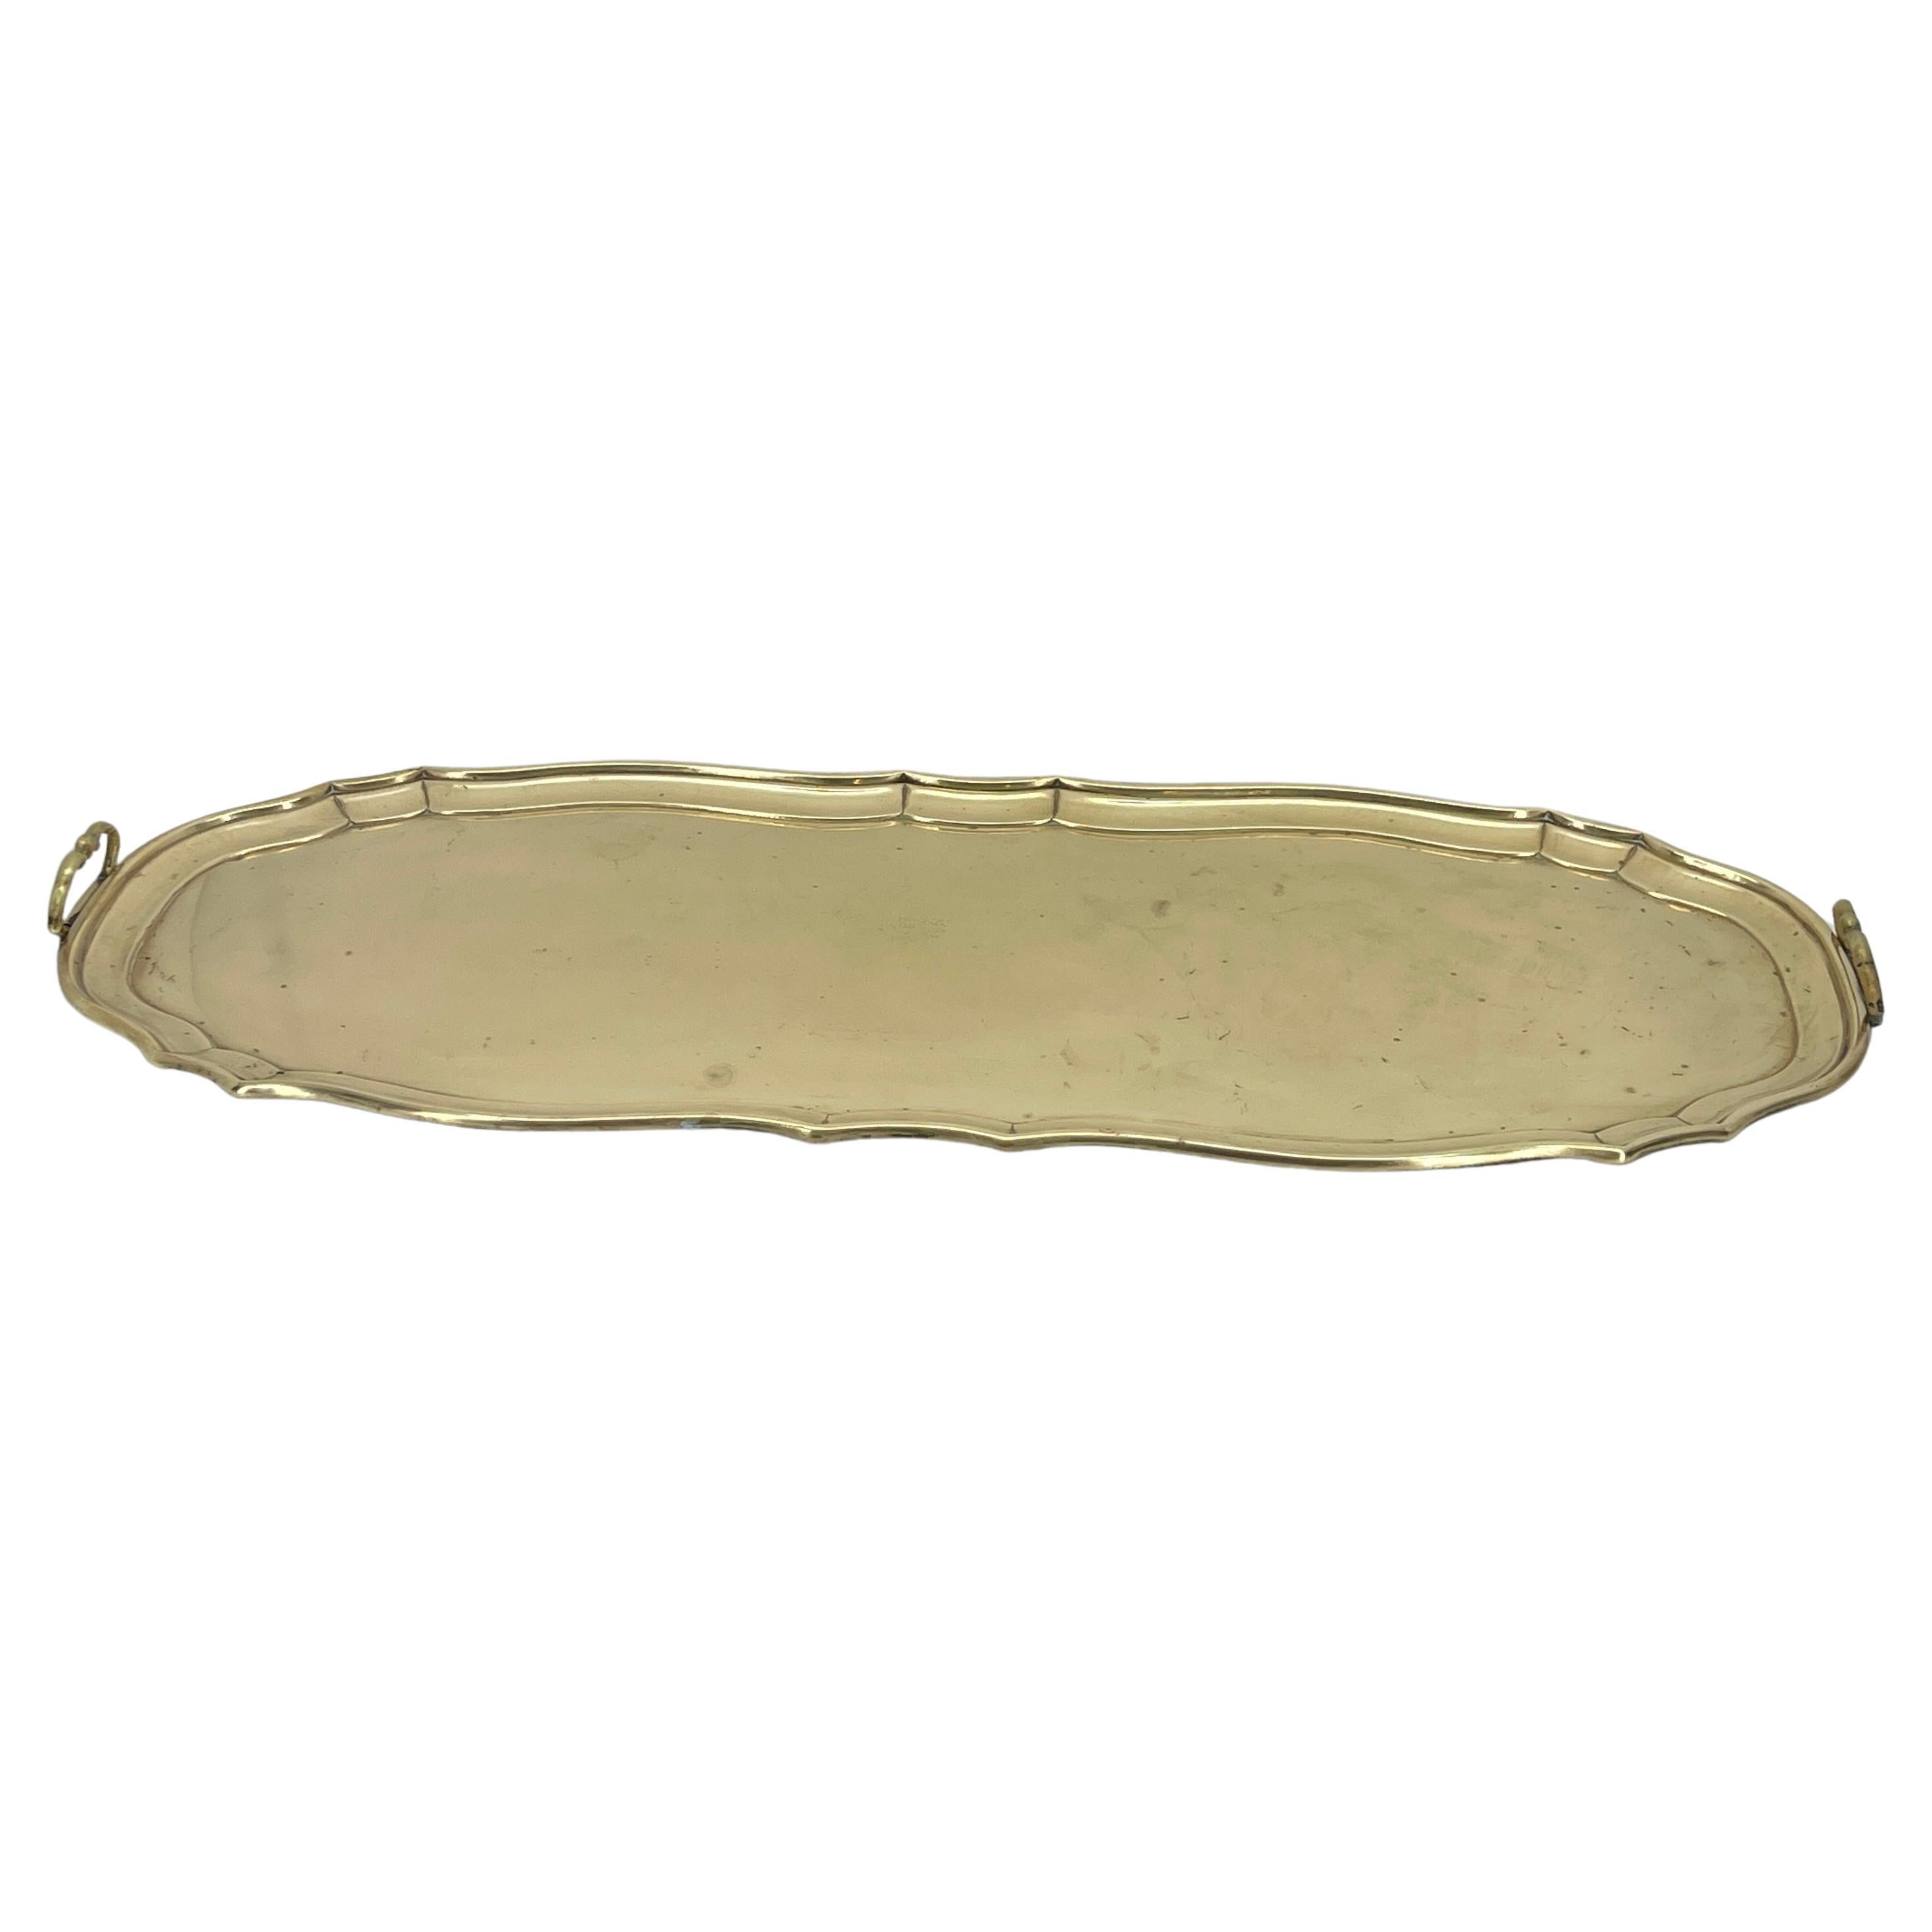 Hand-Crafted Large Solid Brass Art Nouveau Centerpiece Barware Tray